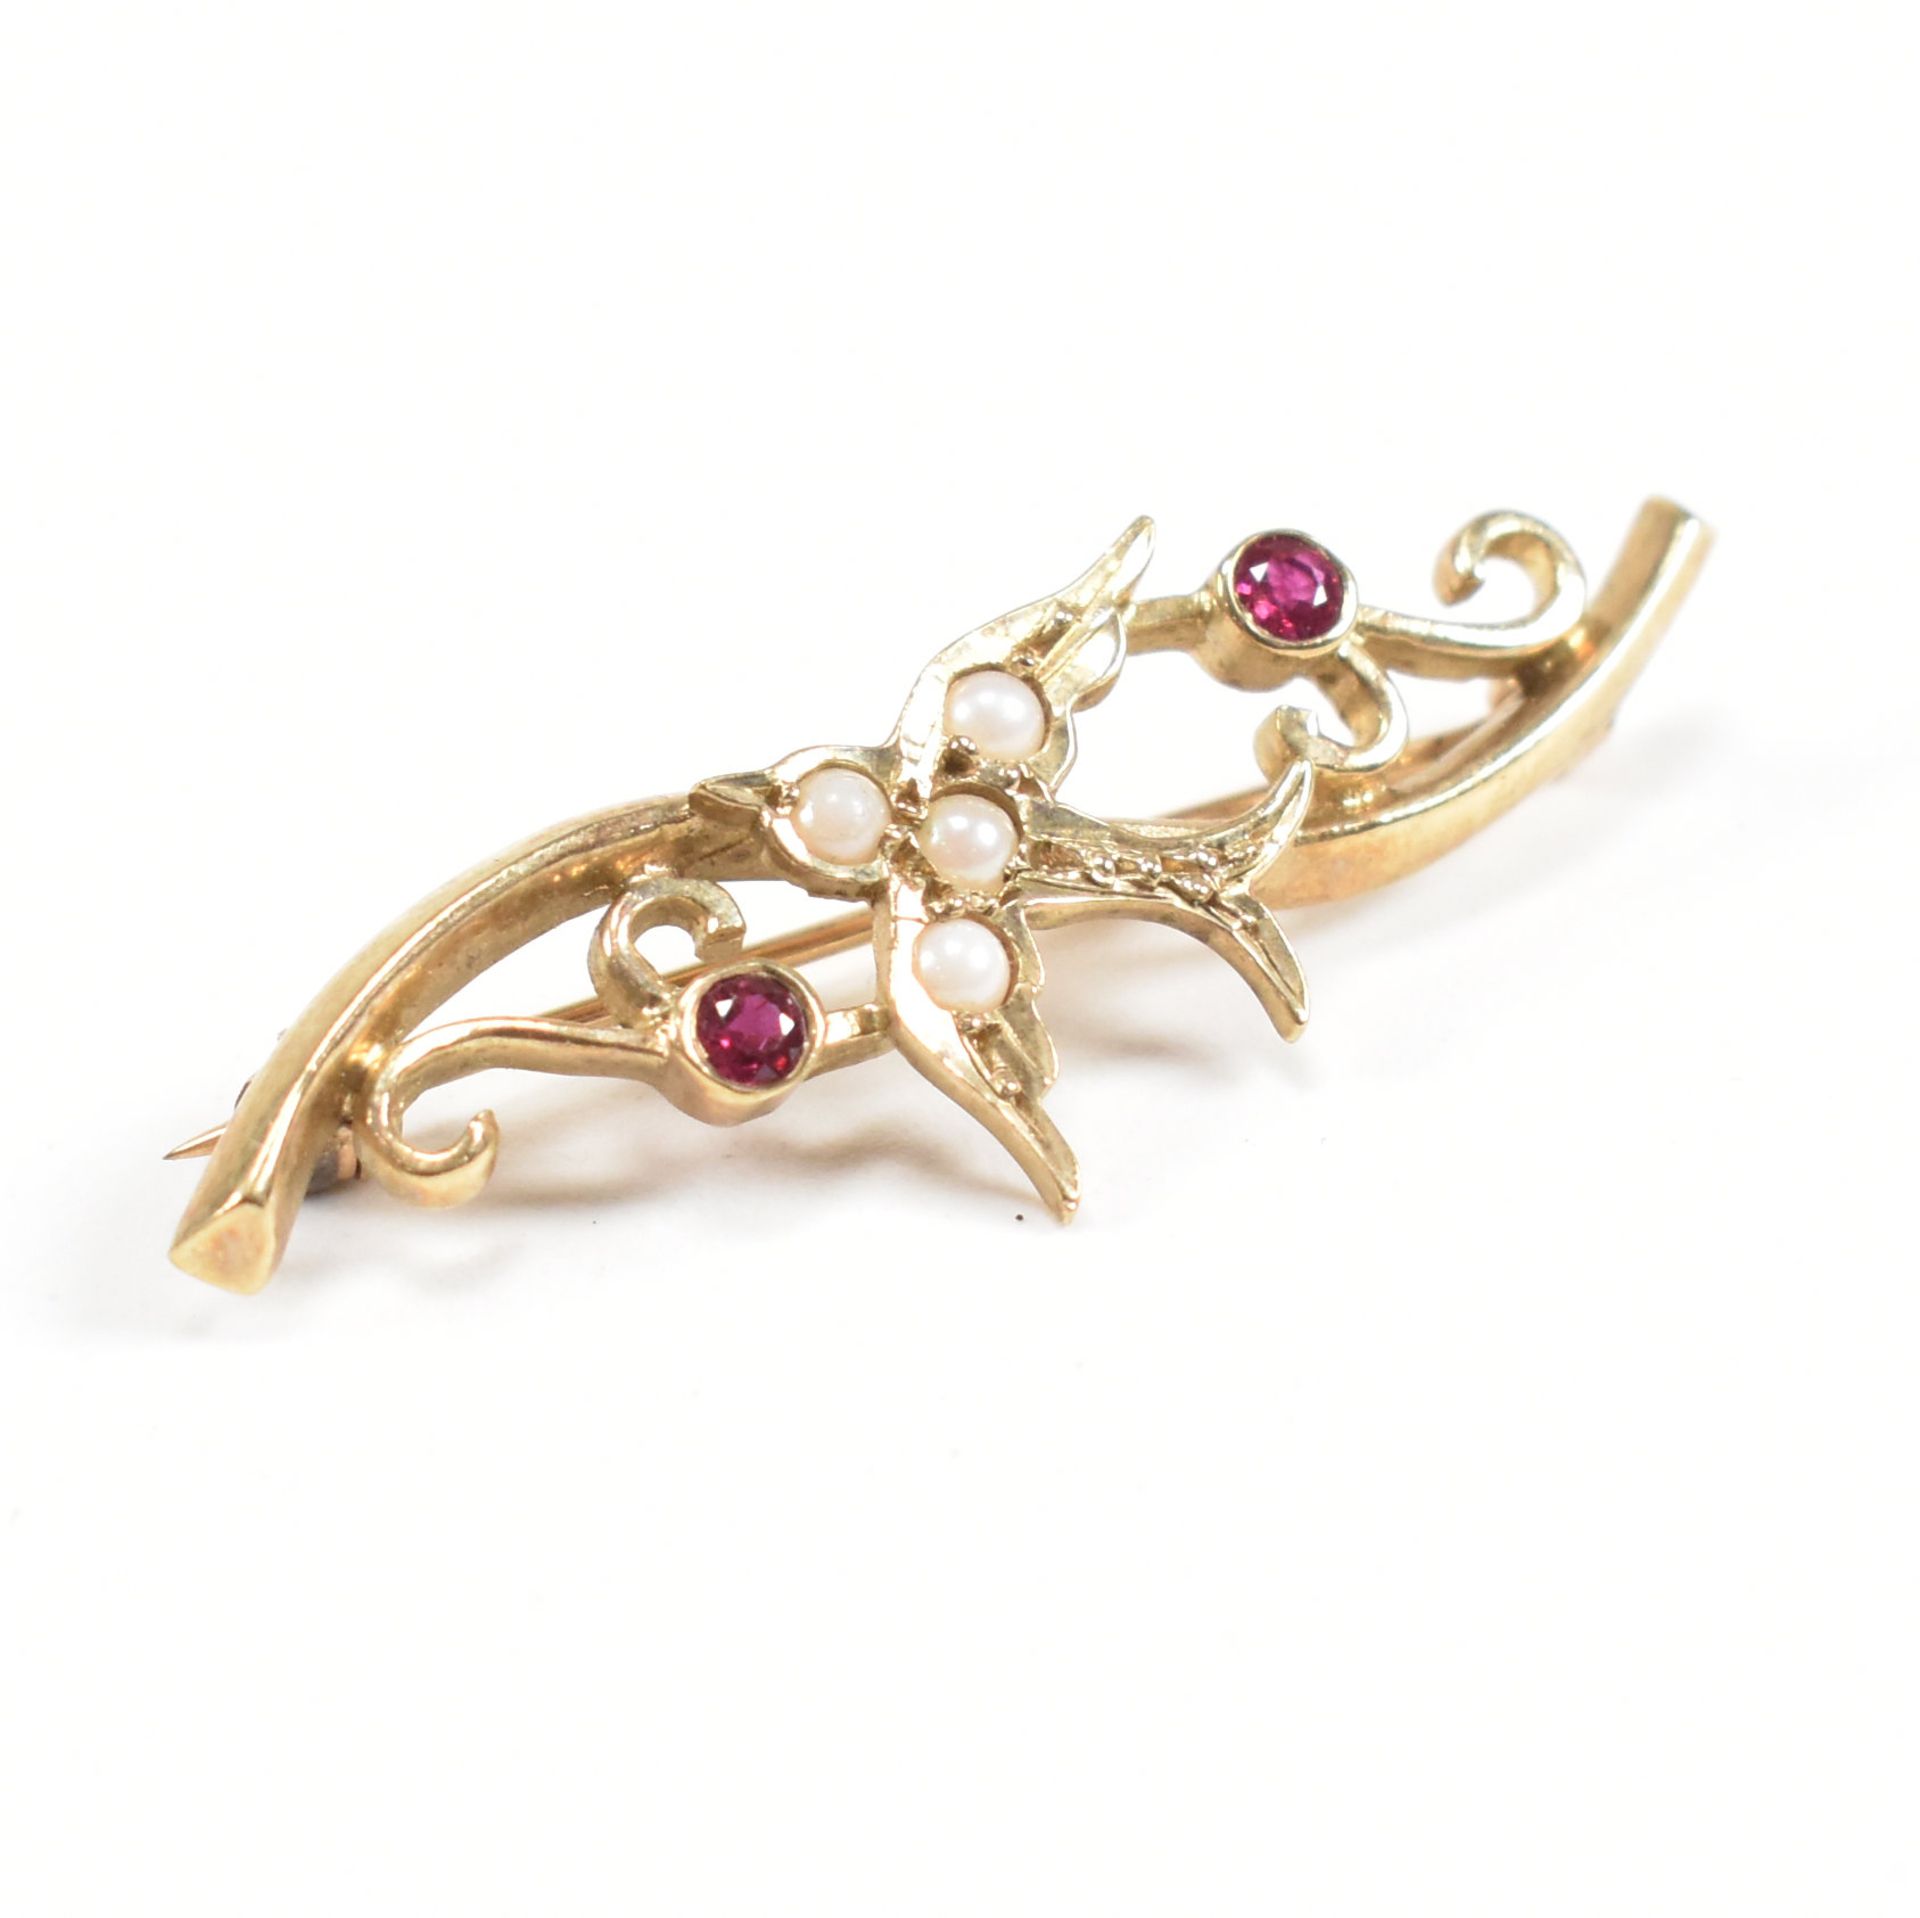 HALLMARKED 9CT GOLD RUBY & PEARL SWALLOW BROOCH PIN - Image 4 of 7